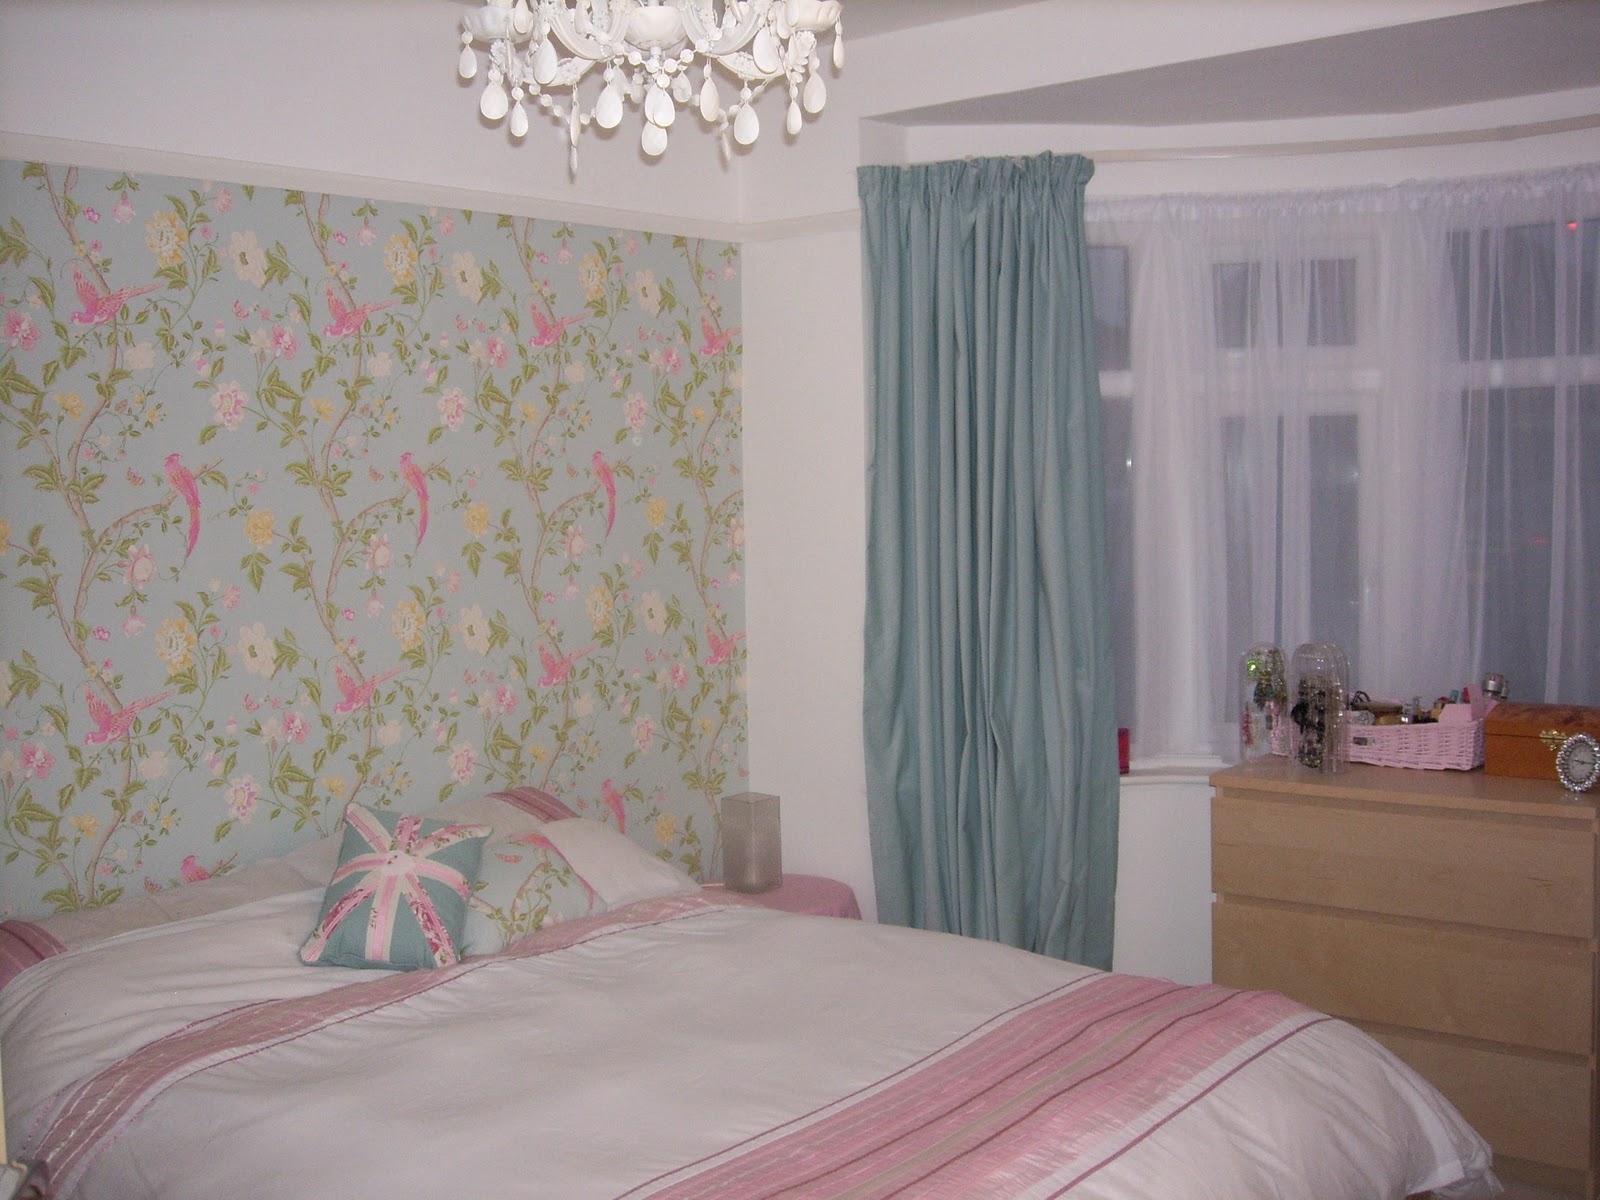 The Wallpaper Is Summer Palace By Laura Ashley And Really Pretty